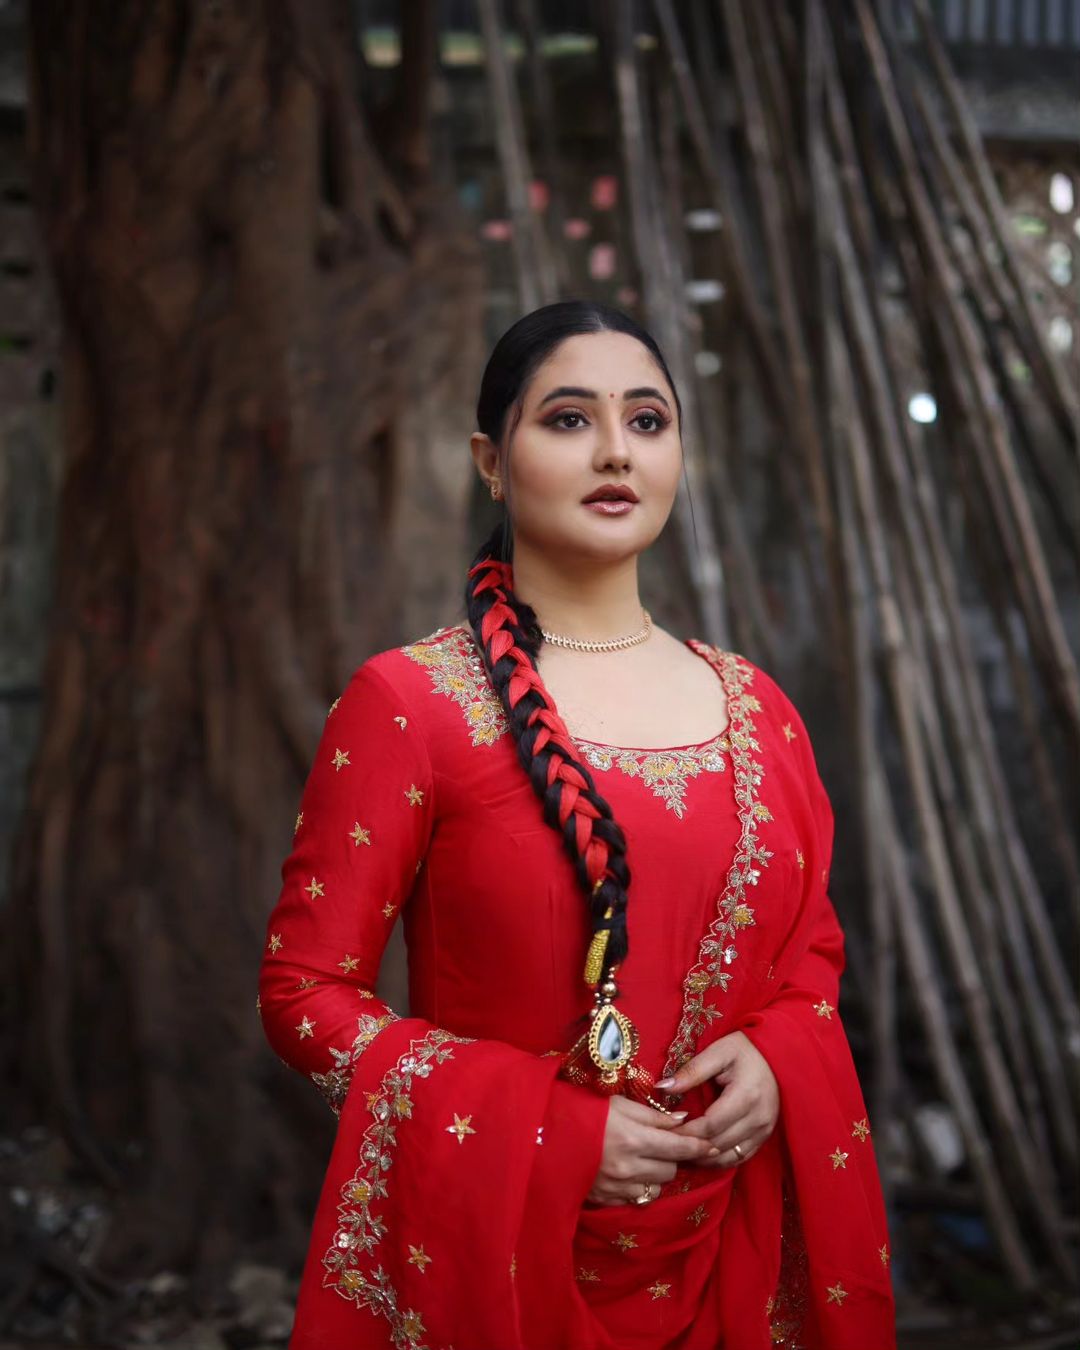 Actress Rashami Desai On Dussehra Celebrations Shared Her Plans Of Witnessing Ravan Dehan. She Said She Used To Be Very Excited To See The Same.